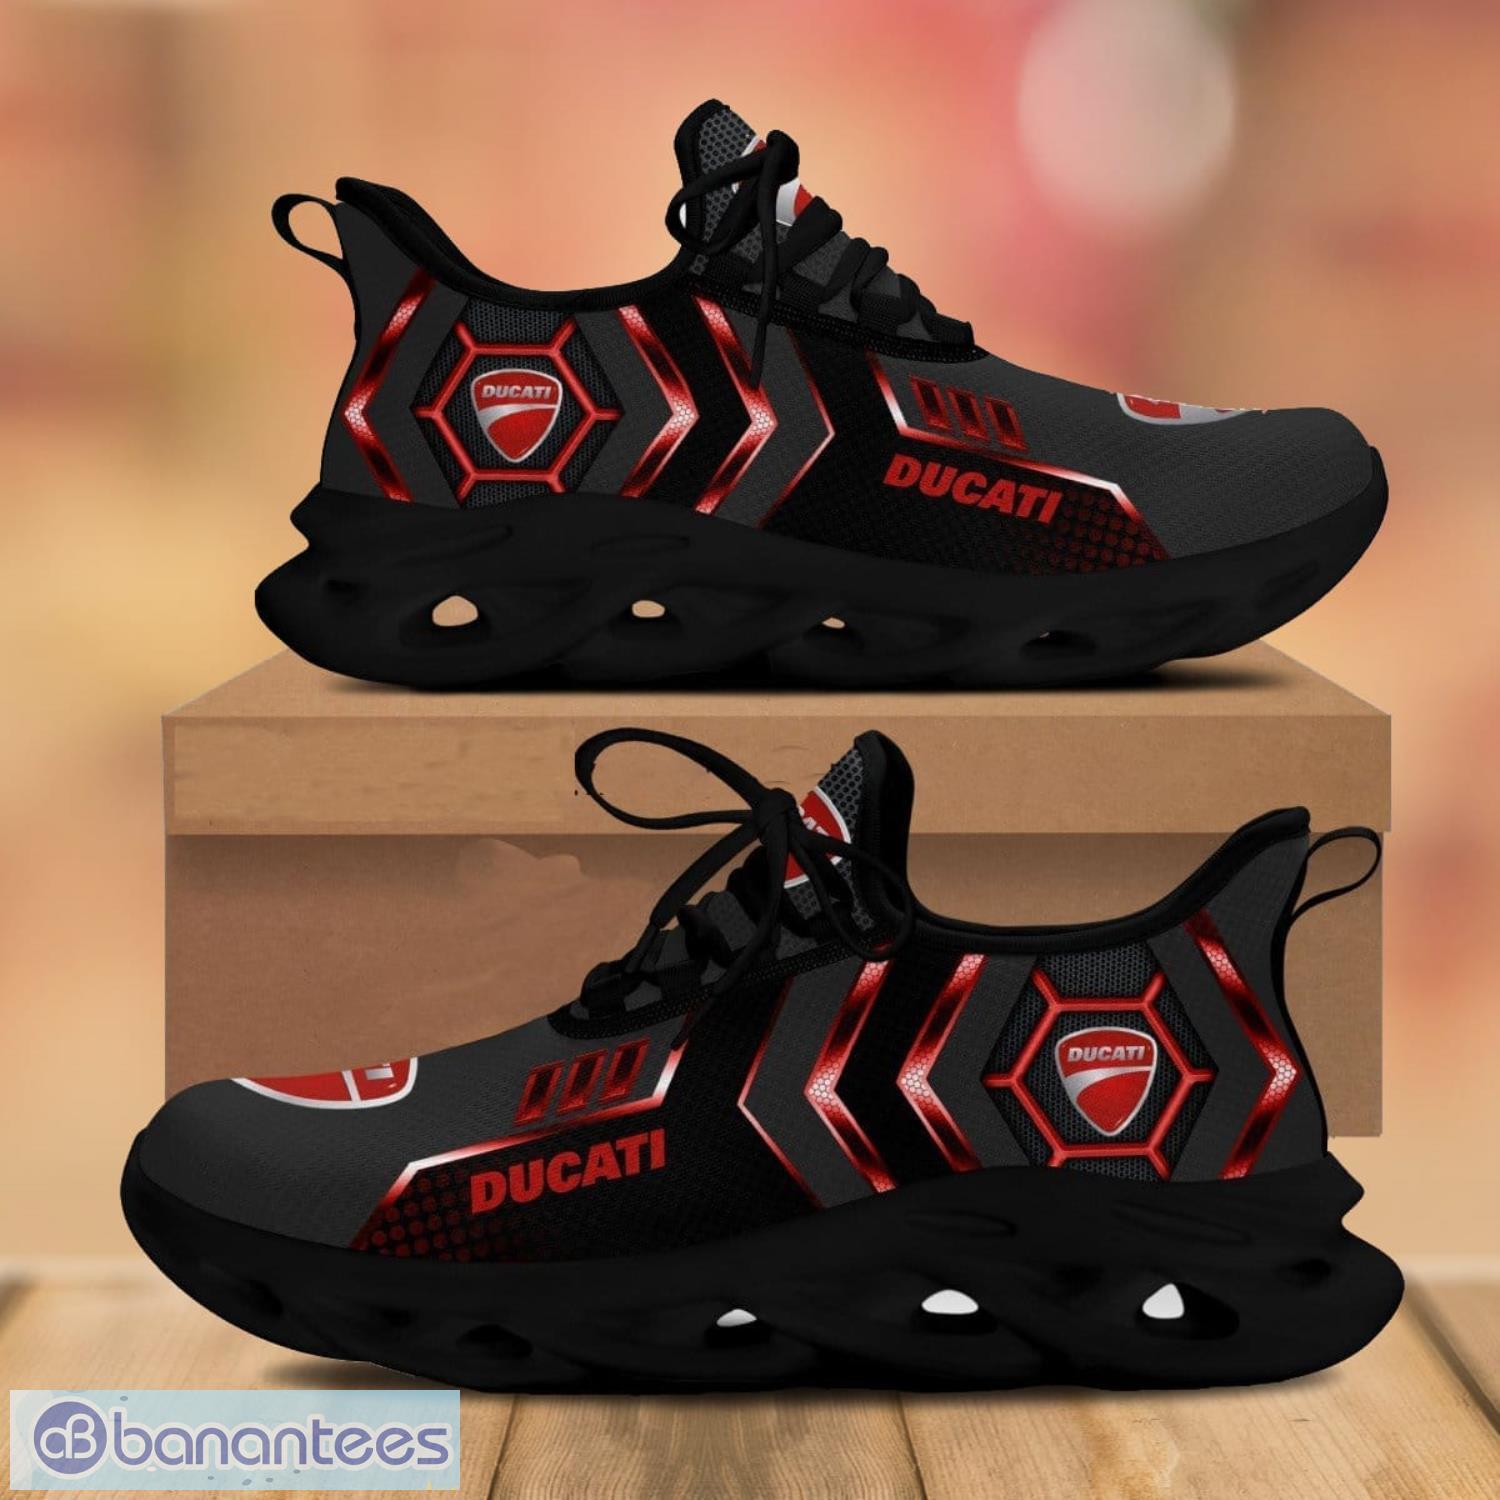 Ducatti Max Soul Shoes Ultra Running Sneakers For Men And Women Gift Product Photo 1